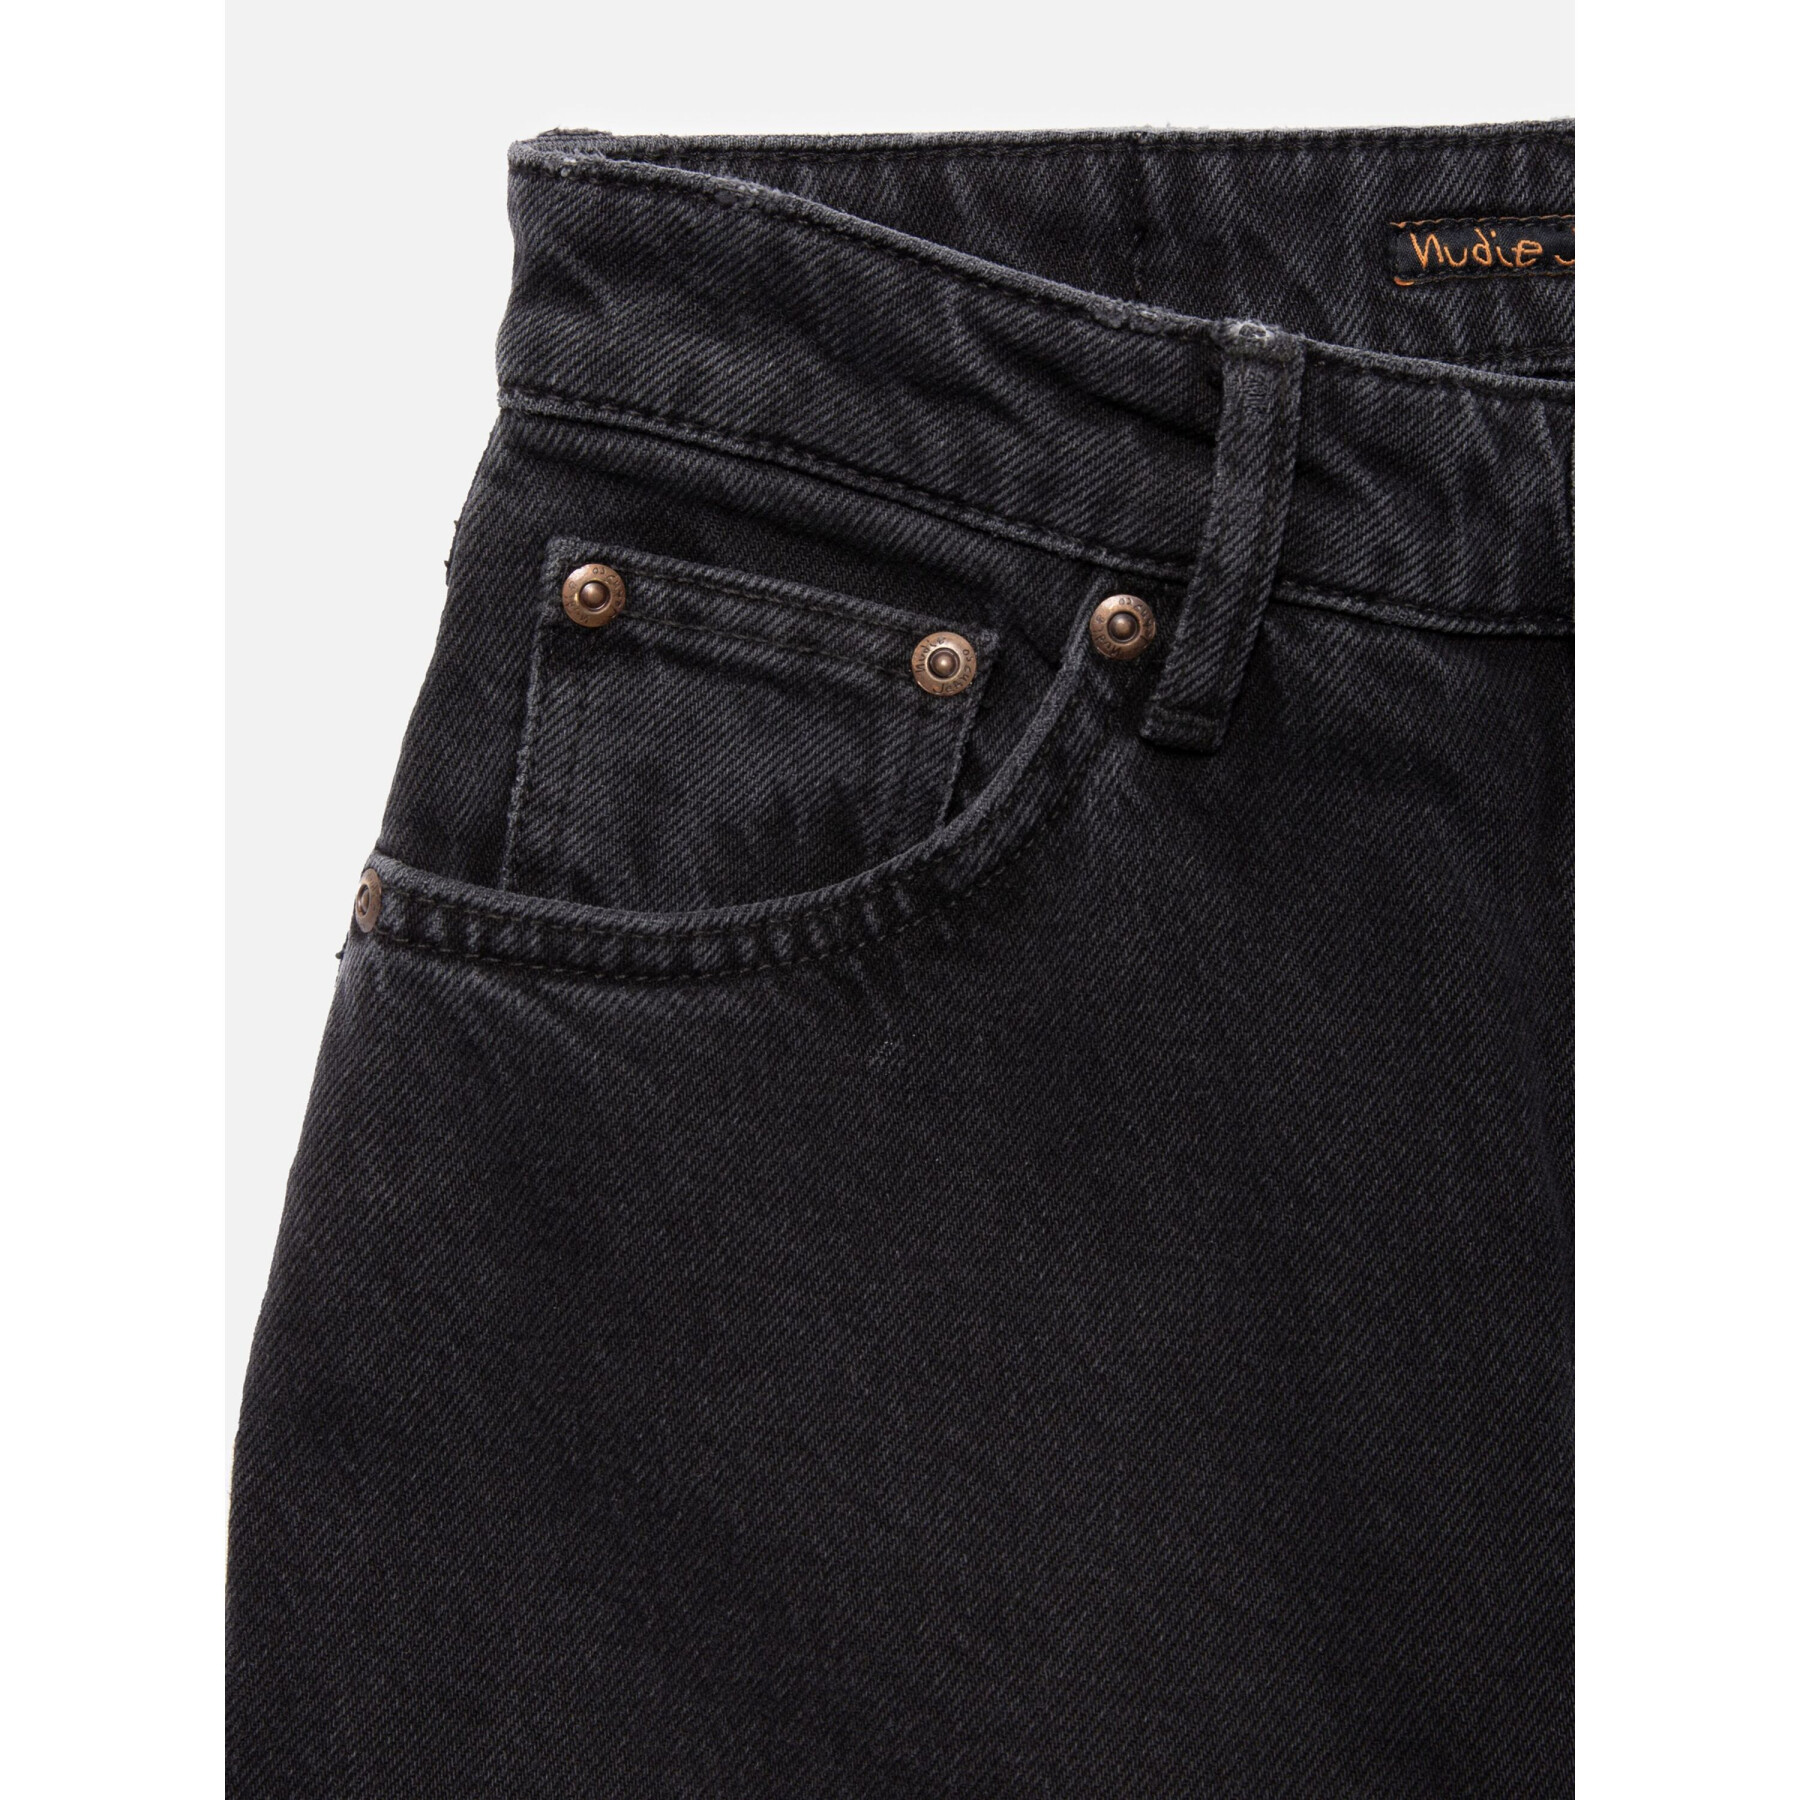 Women's jeans Nudie Jeans Rowdy Ruth